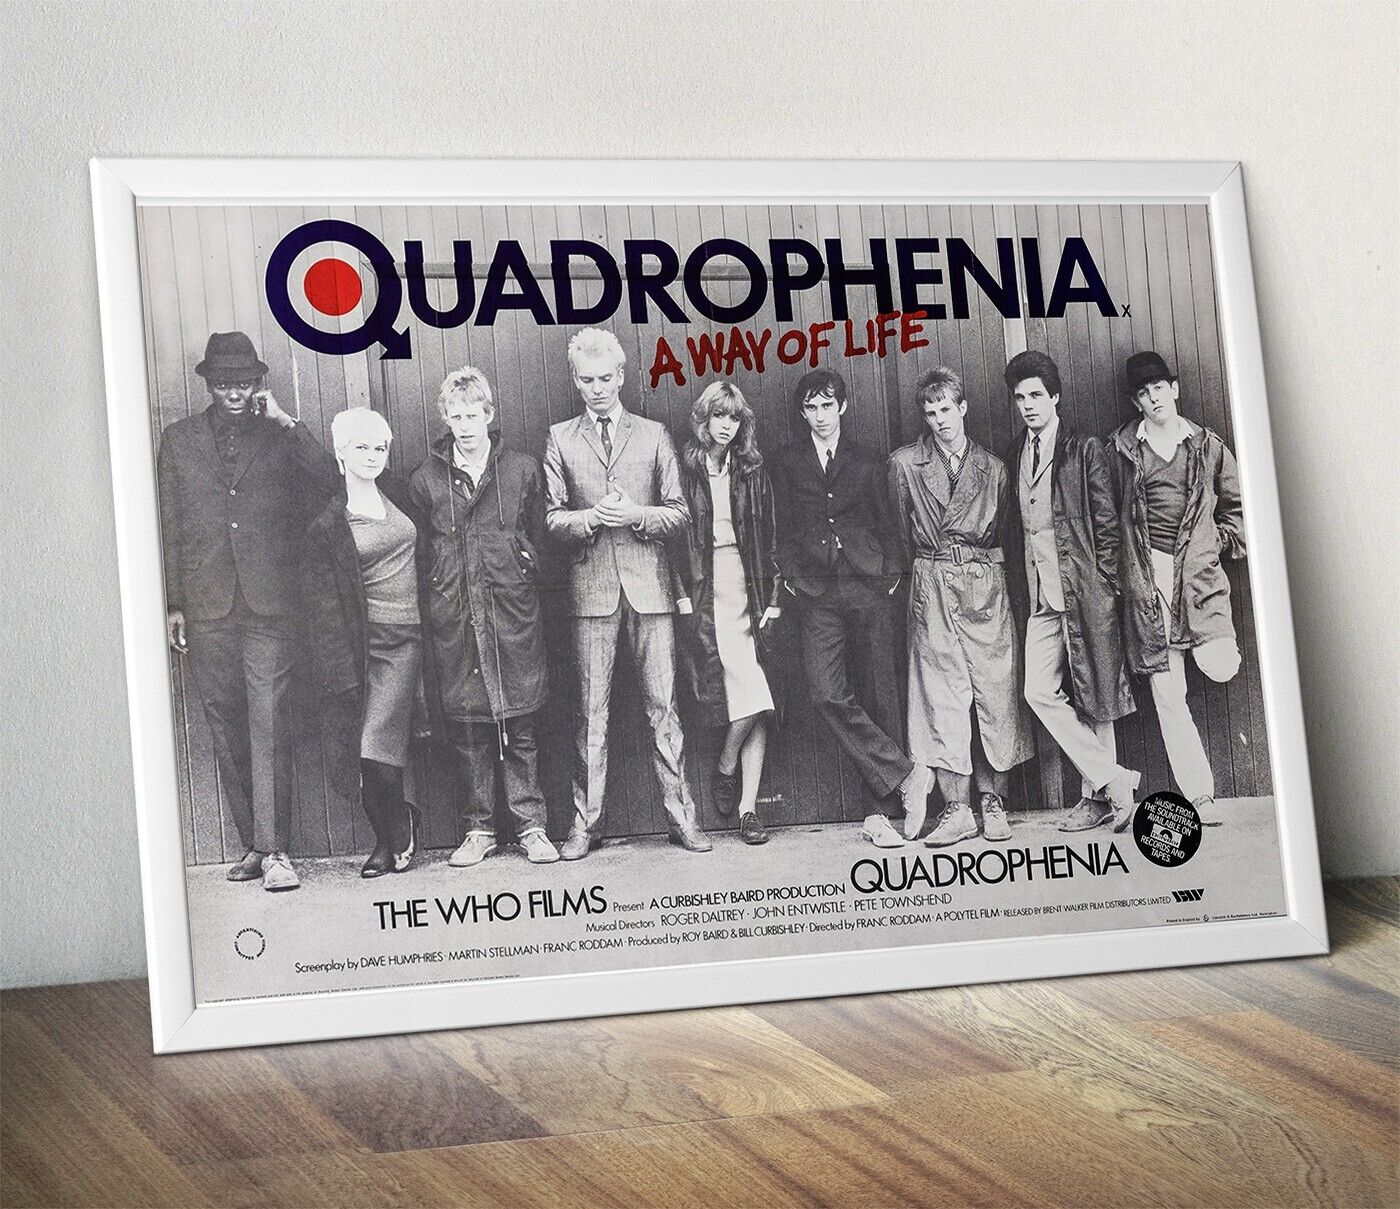 Quadrophenia A Way of Life : King Size Vintage Movie Poster 36"x24"